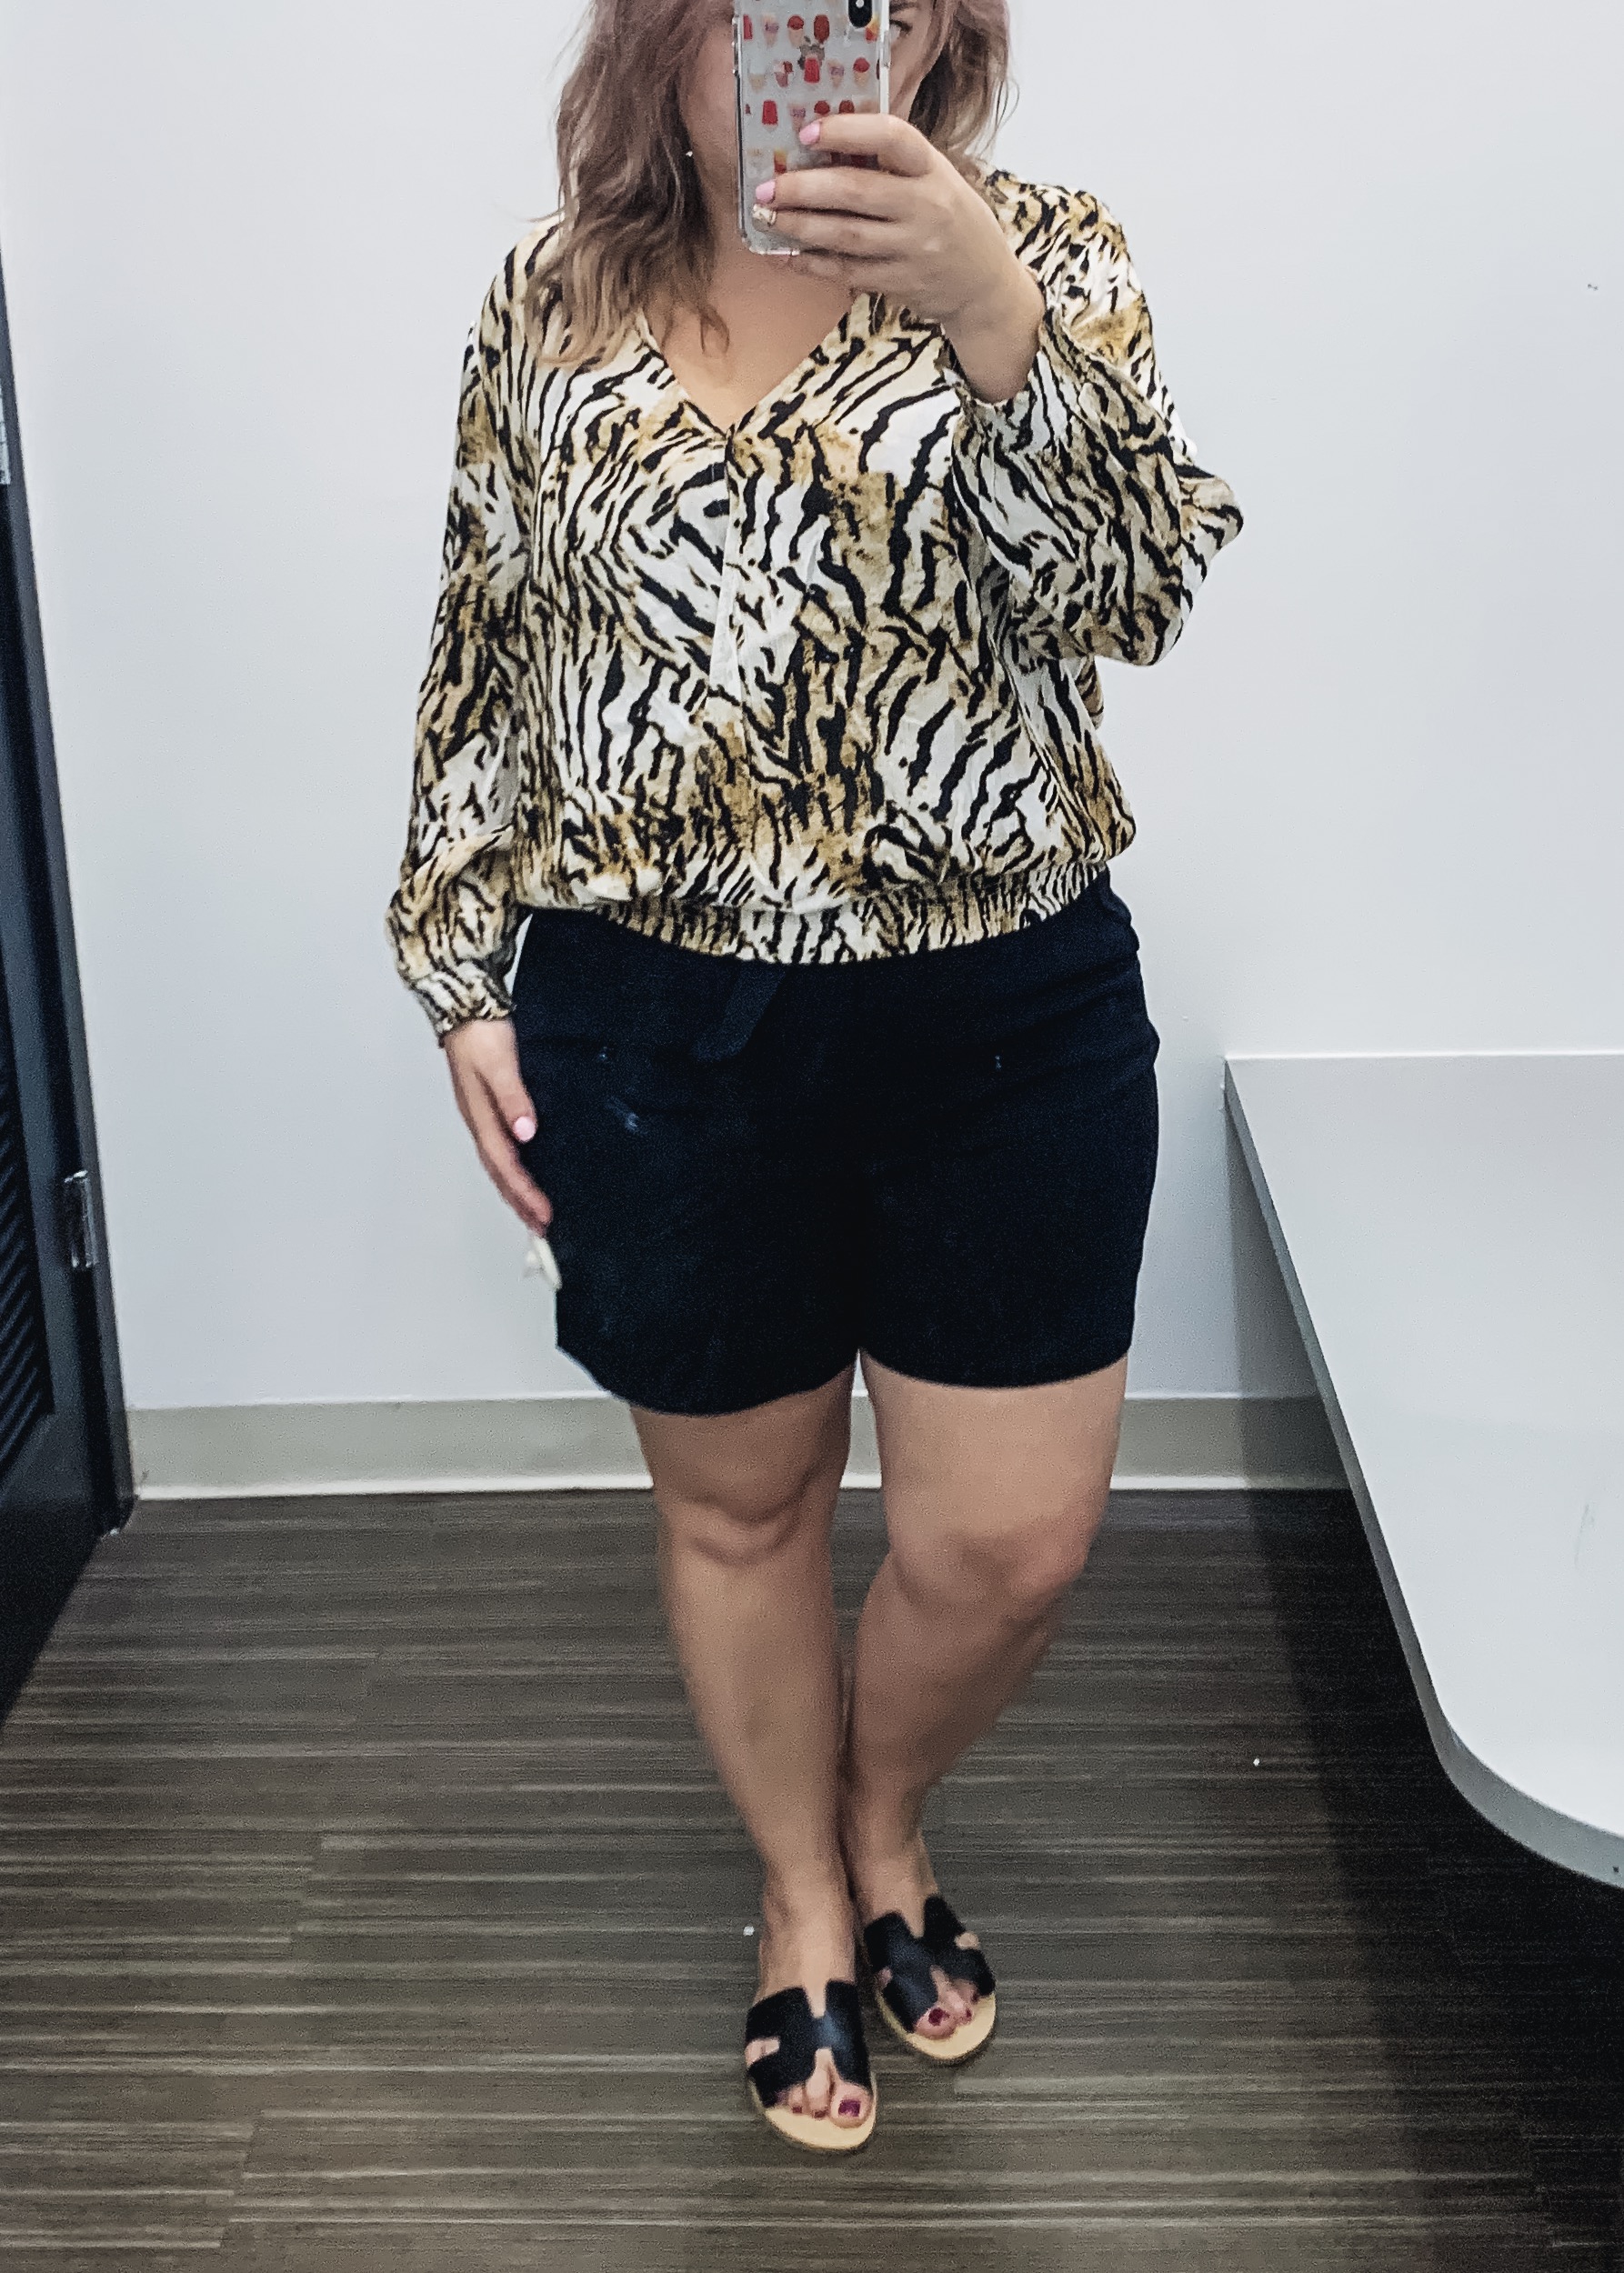 Summer Animal Print Outfit 